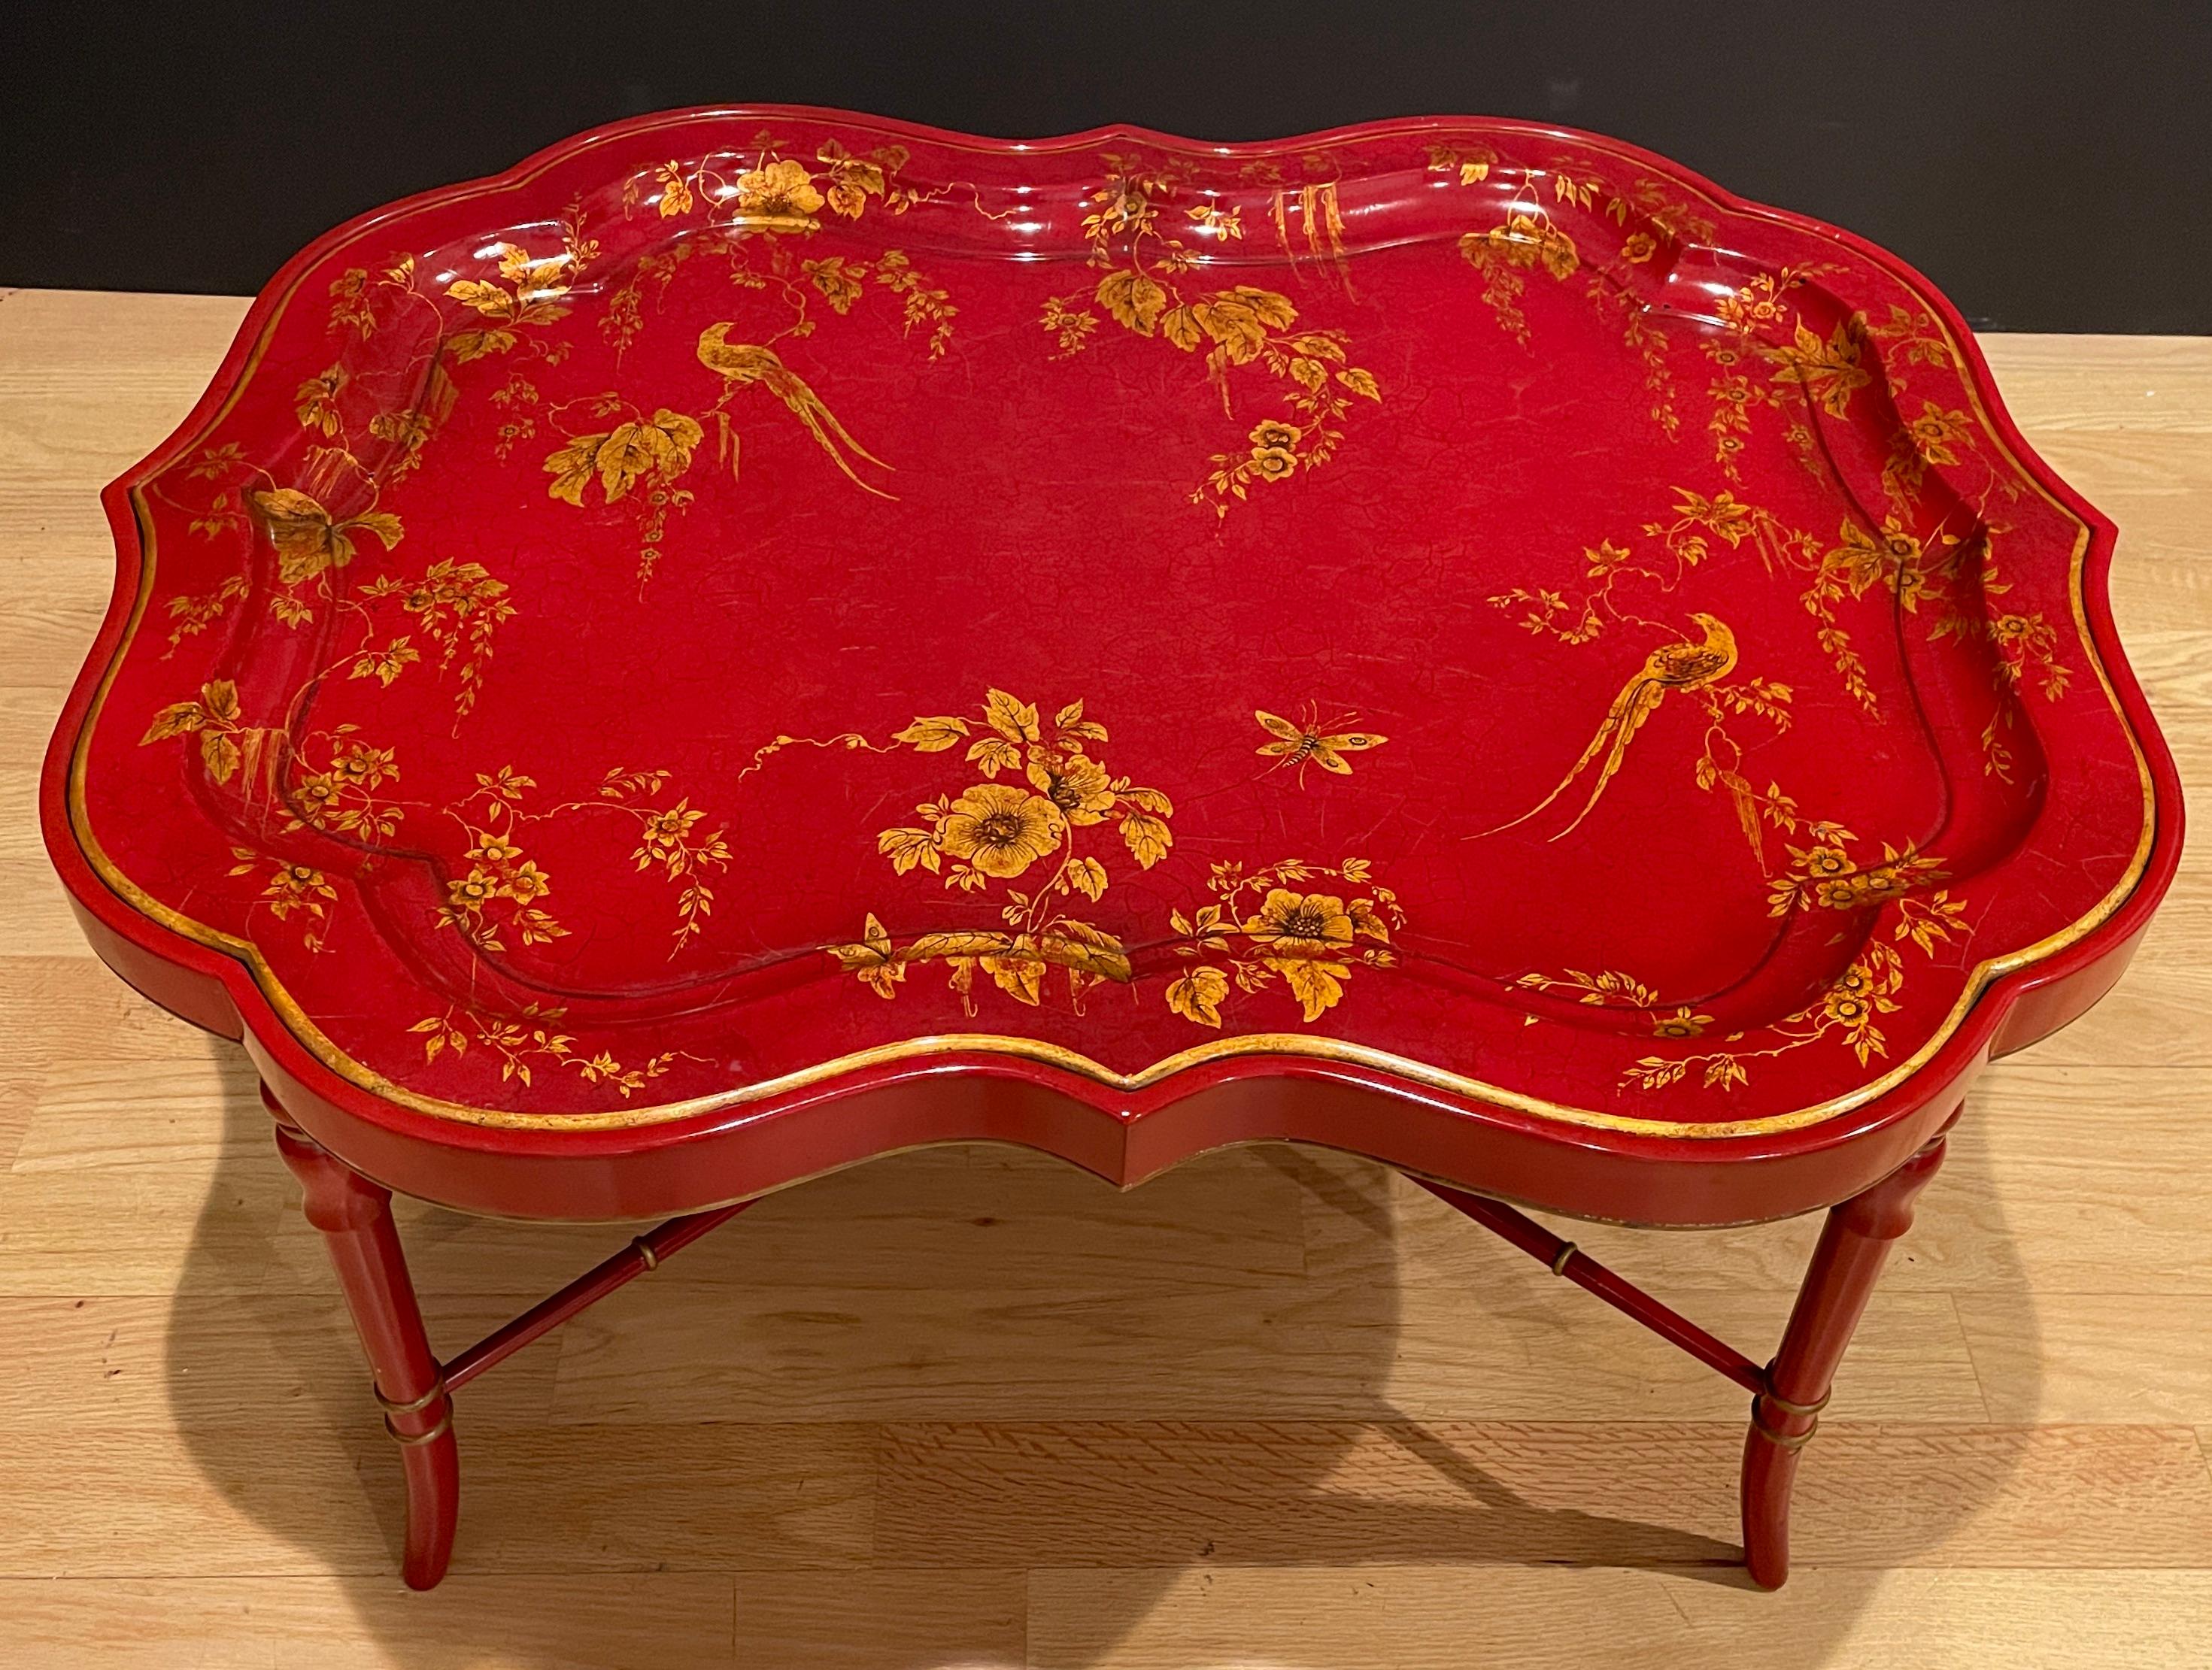 Red lacquer and gilt decoration with florals, birds and butterflies. Faux bamboo legs and cross stretcher. Removable tray top with felt interior. This tastefully designed tray table is perfect for anyone who loves traditional Chinoiserie, with